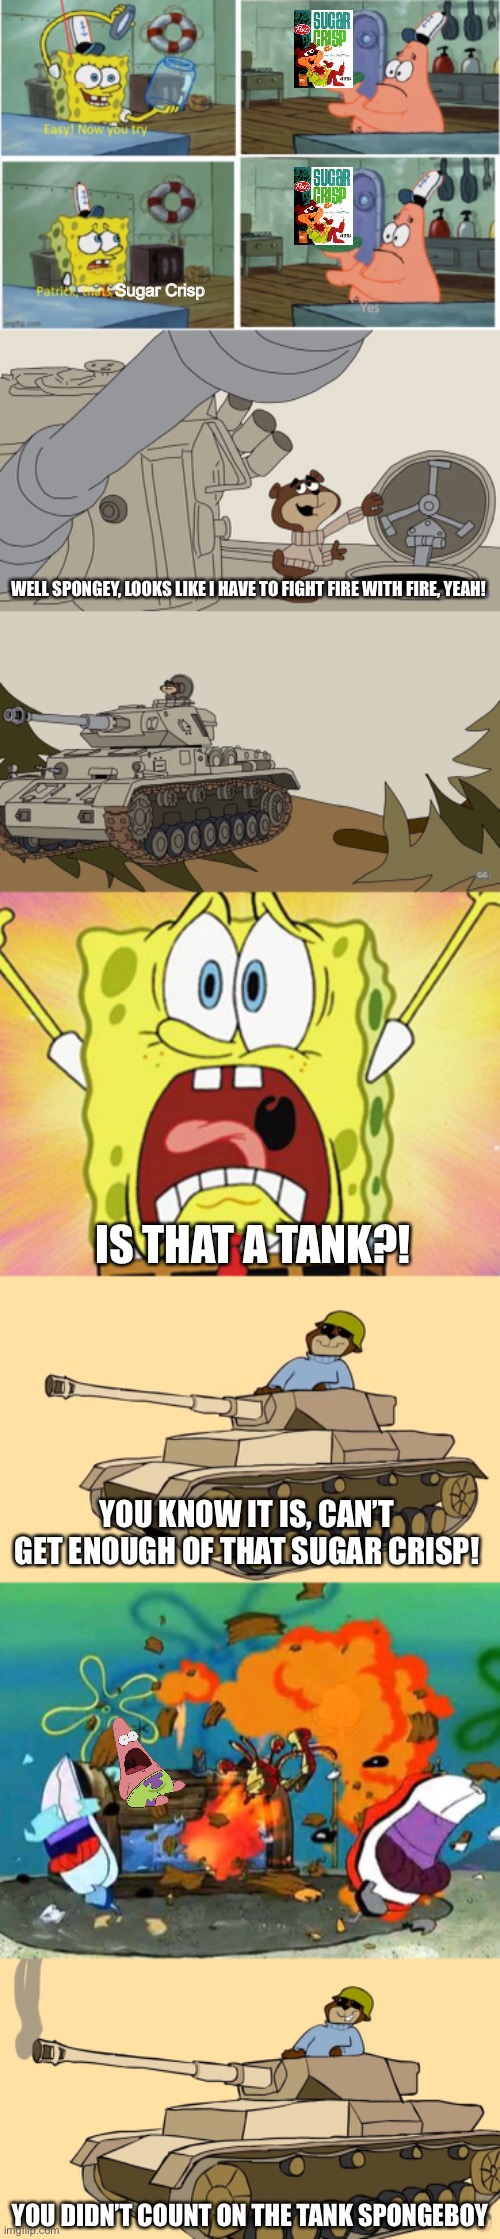 Patrick that’s Sugar Crisp | Sugar Crisp; WELL SPONGEY, LOOKS LIKE I HAVE TO FIGHT FIRE WITH FIRE, YEAH! IS THAT A TANK?! YOU KNOW IT IS, CAN’T GET ENOUGH OF THAT SUGAR CRISP! YOU DIDN’T COUNT ON THE TANK SPONGEBOY | image tagged in patrick thats a,shocked spongebob,sugar bear,sugar crisp,memes | made w/ Imgflip meme maker